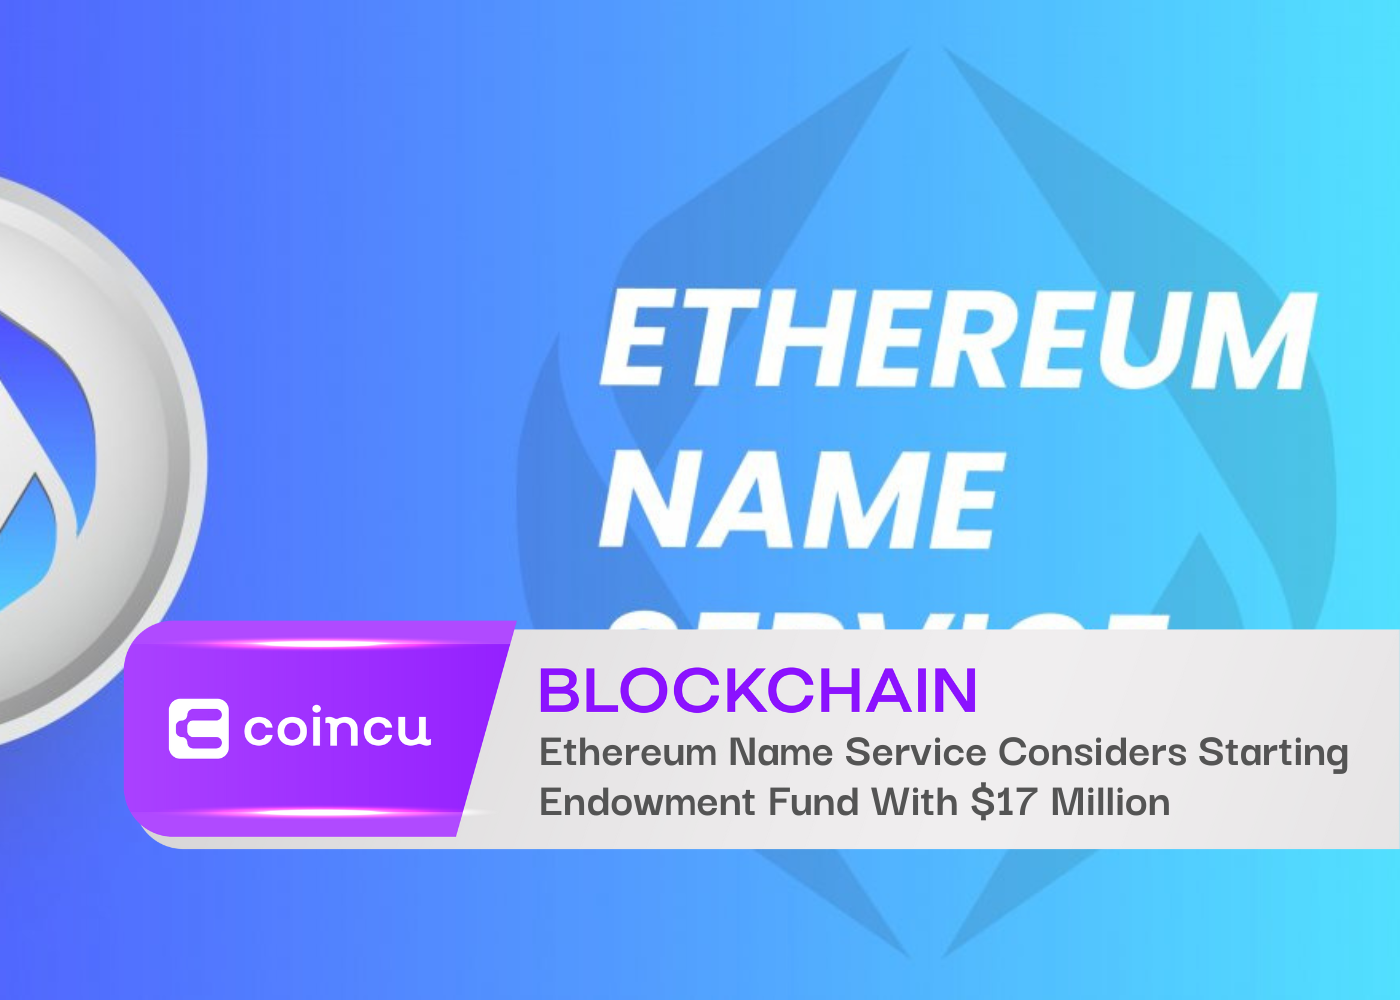 Ethereum Name Service Considers Starting